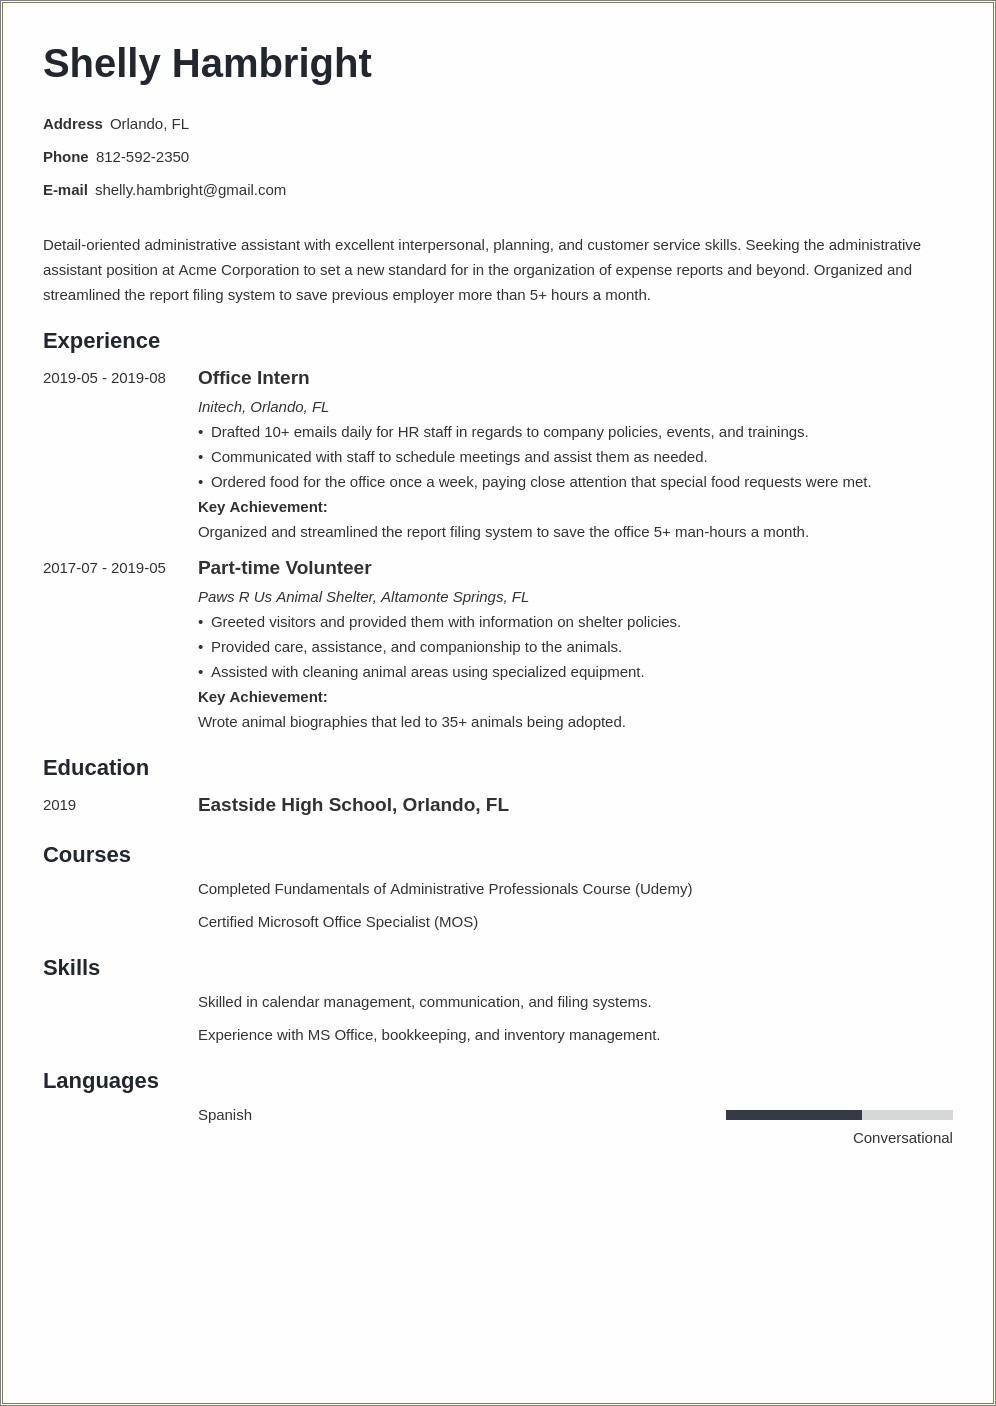 Office Clerk Sample Resume For Construction Company